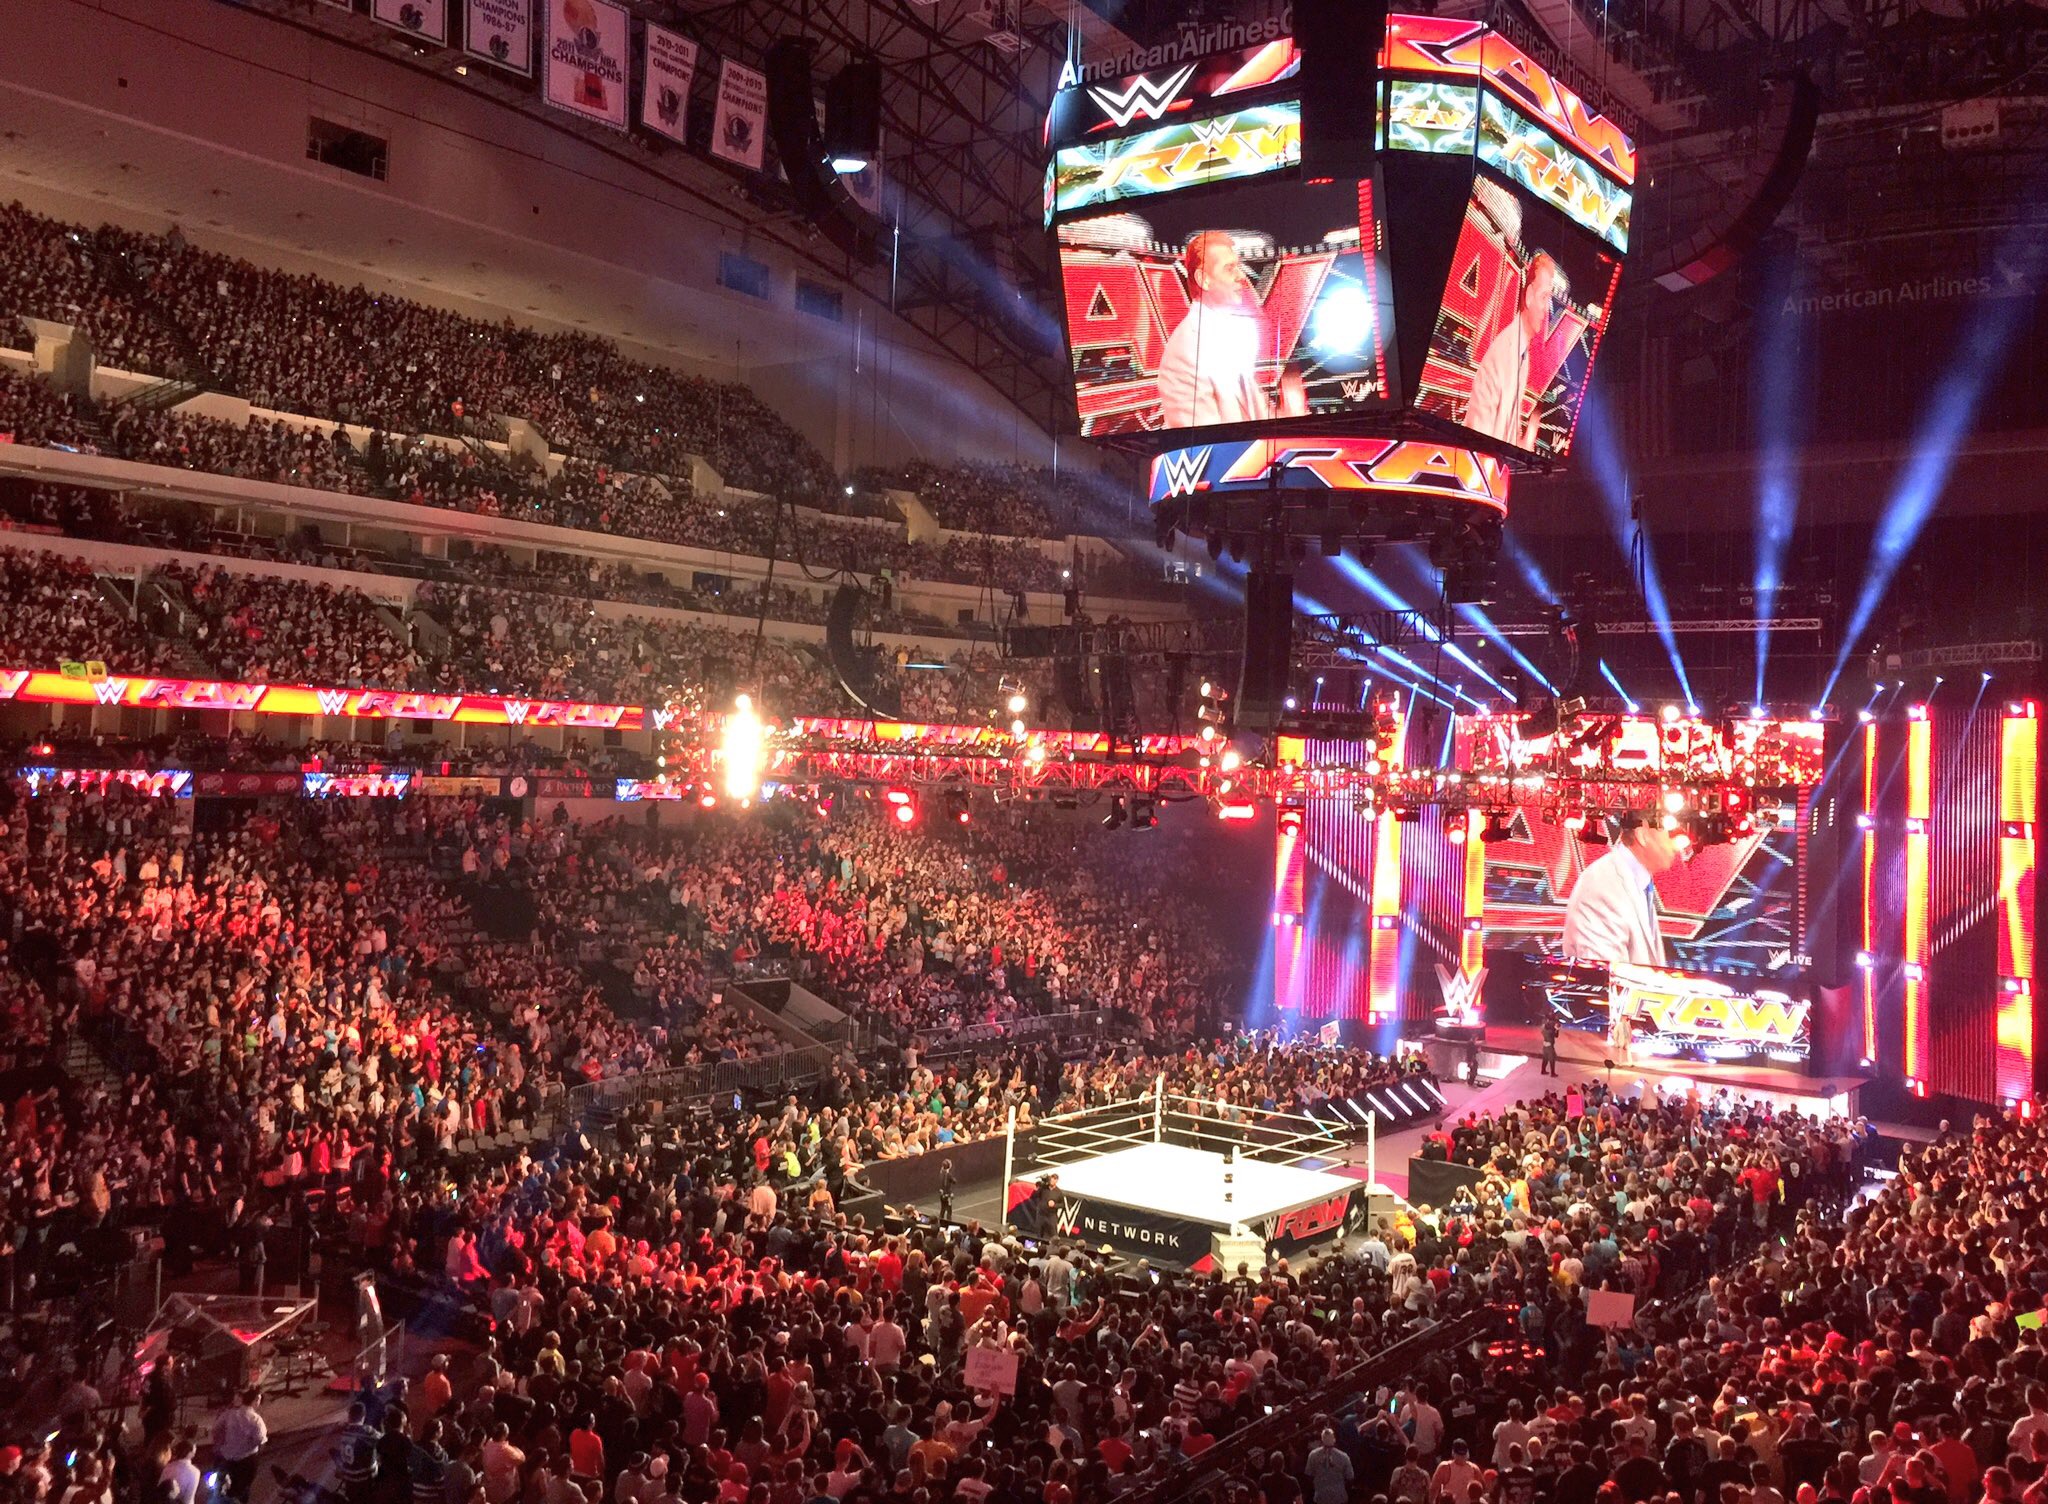 PHOTOS LIVE from Monday Night Raw in Dallas after WrestleMania!